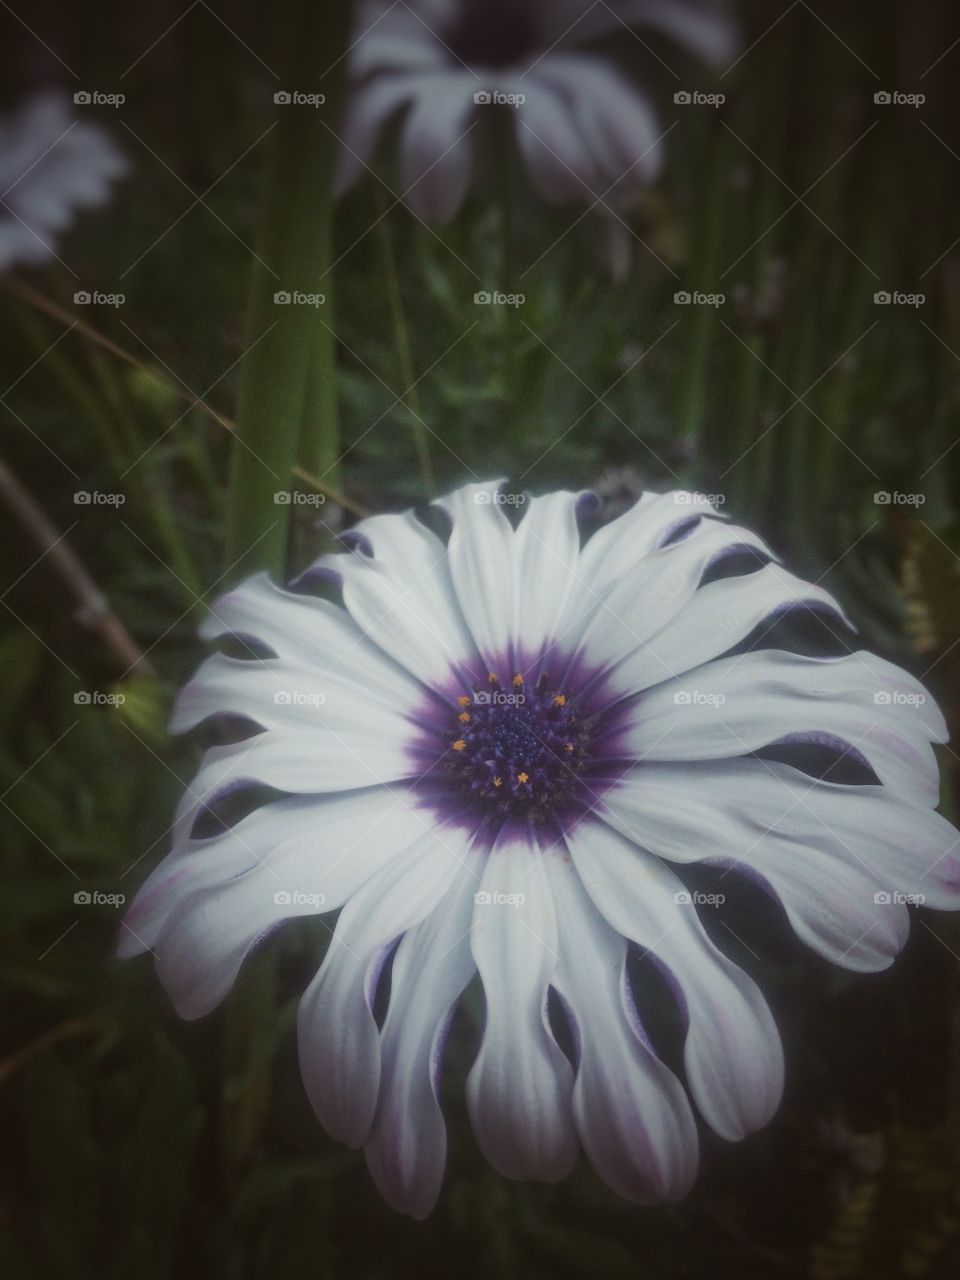 Macro flower with white petals and purple center 